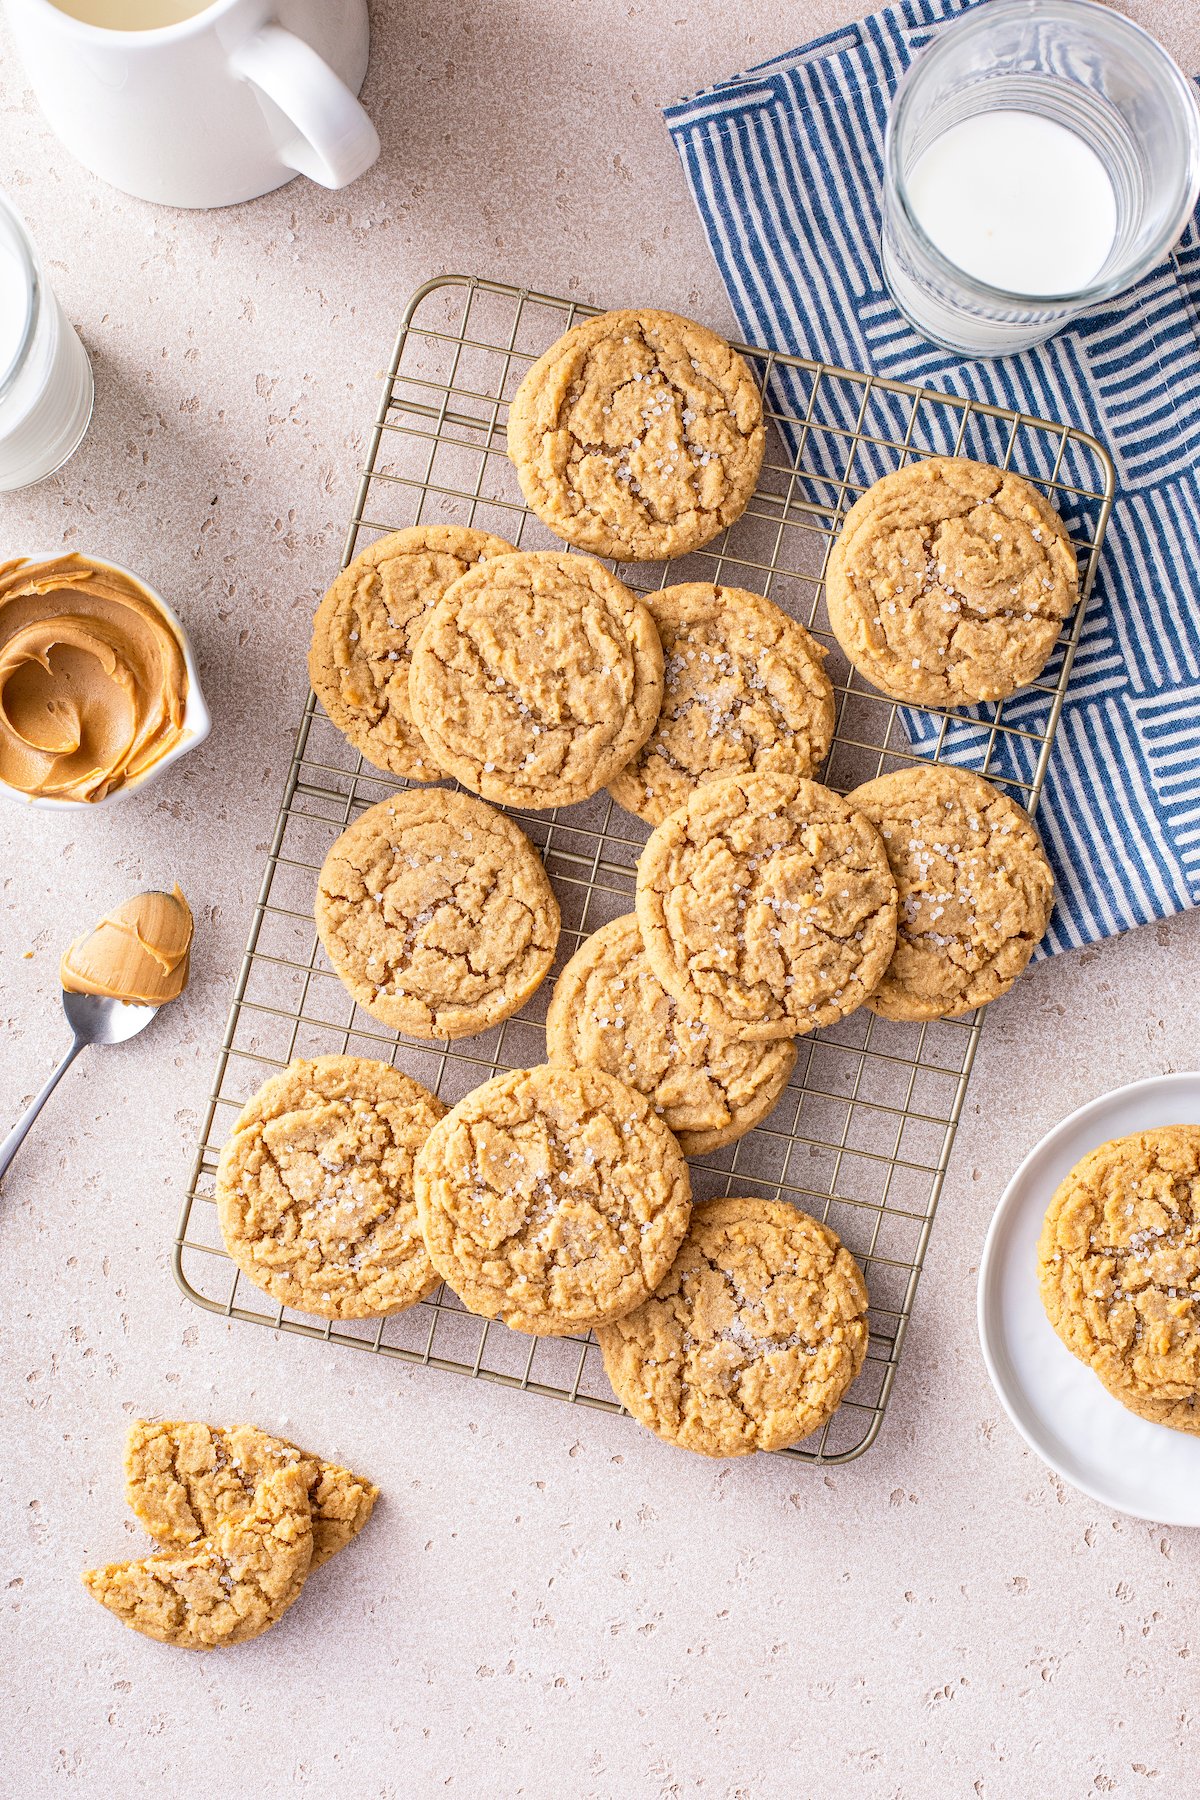 Peanut butter cookies with chewy centers and crisp edges arranged on a cooling rack with a spoonful of peanut butter and a glass of milk on the side.